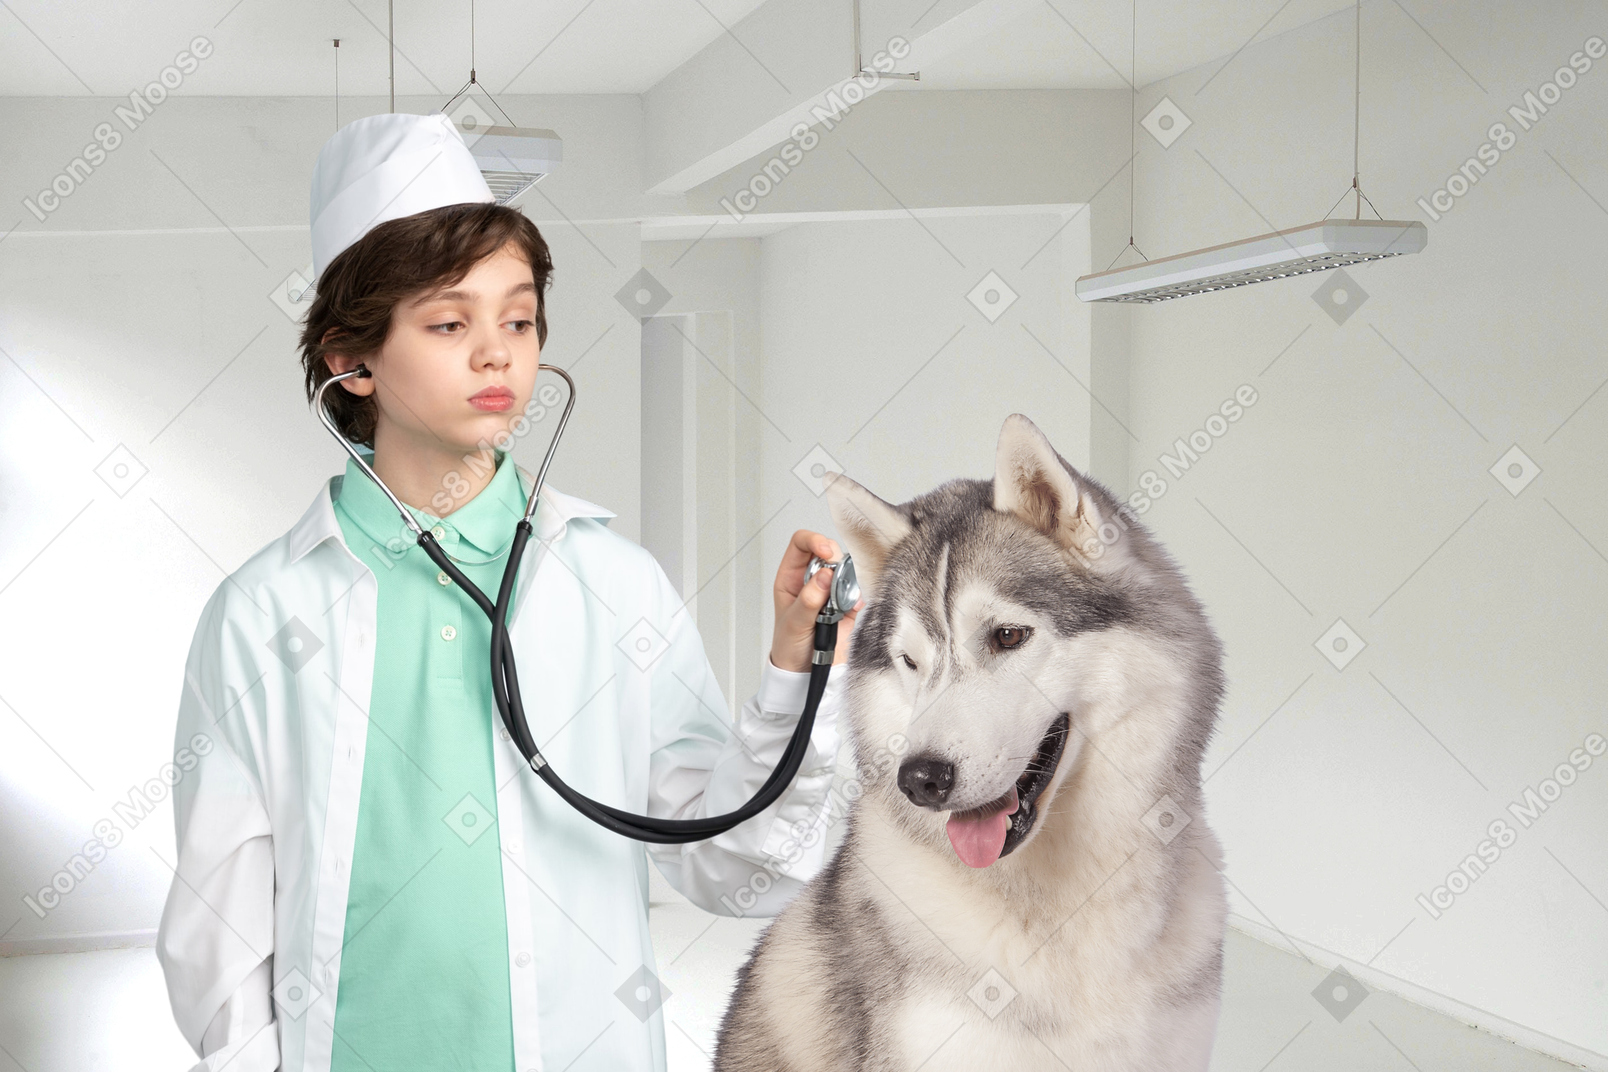 Female doctor with a patient